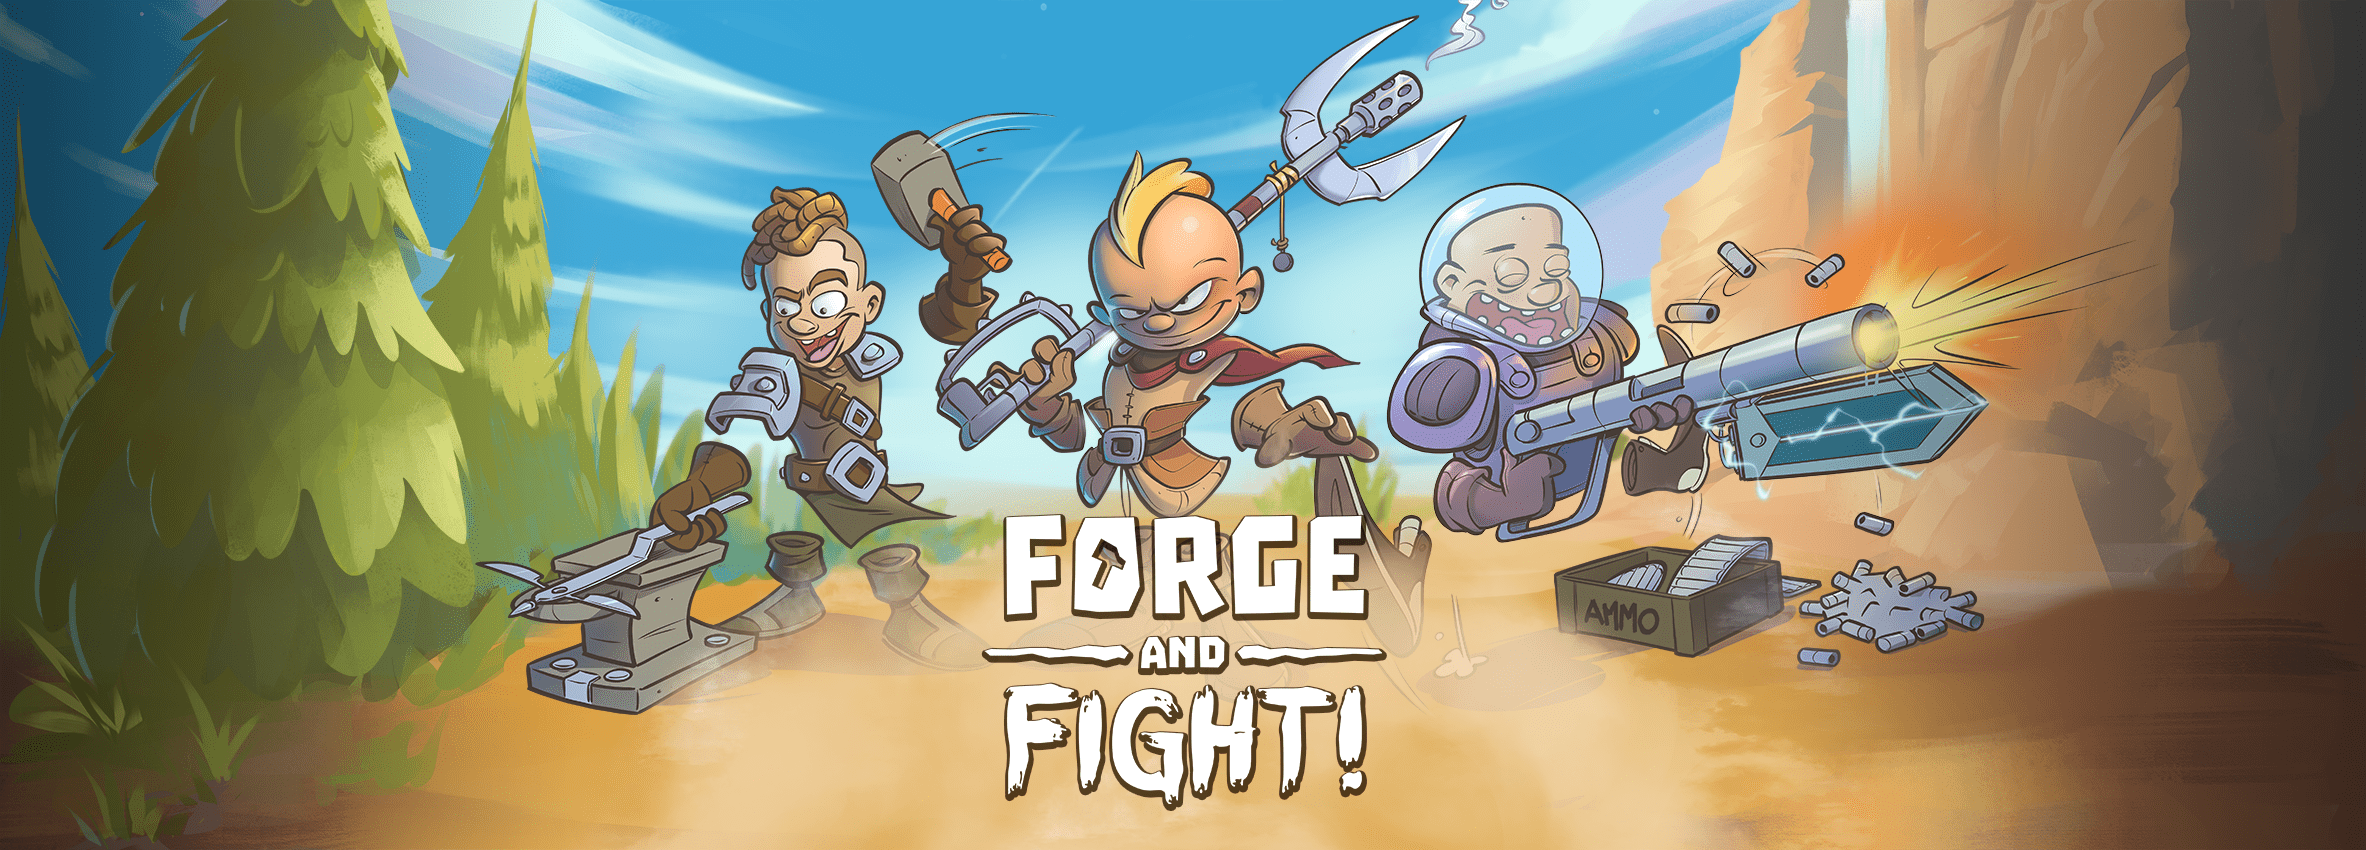 Forge and Fight! – Bonkers Online Brawler